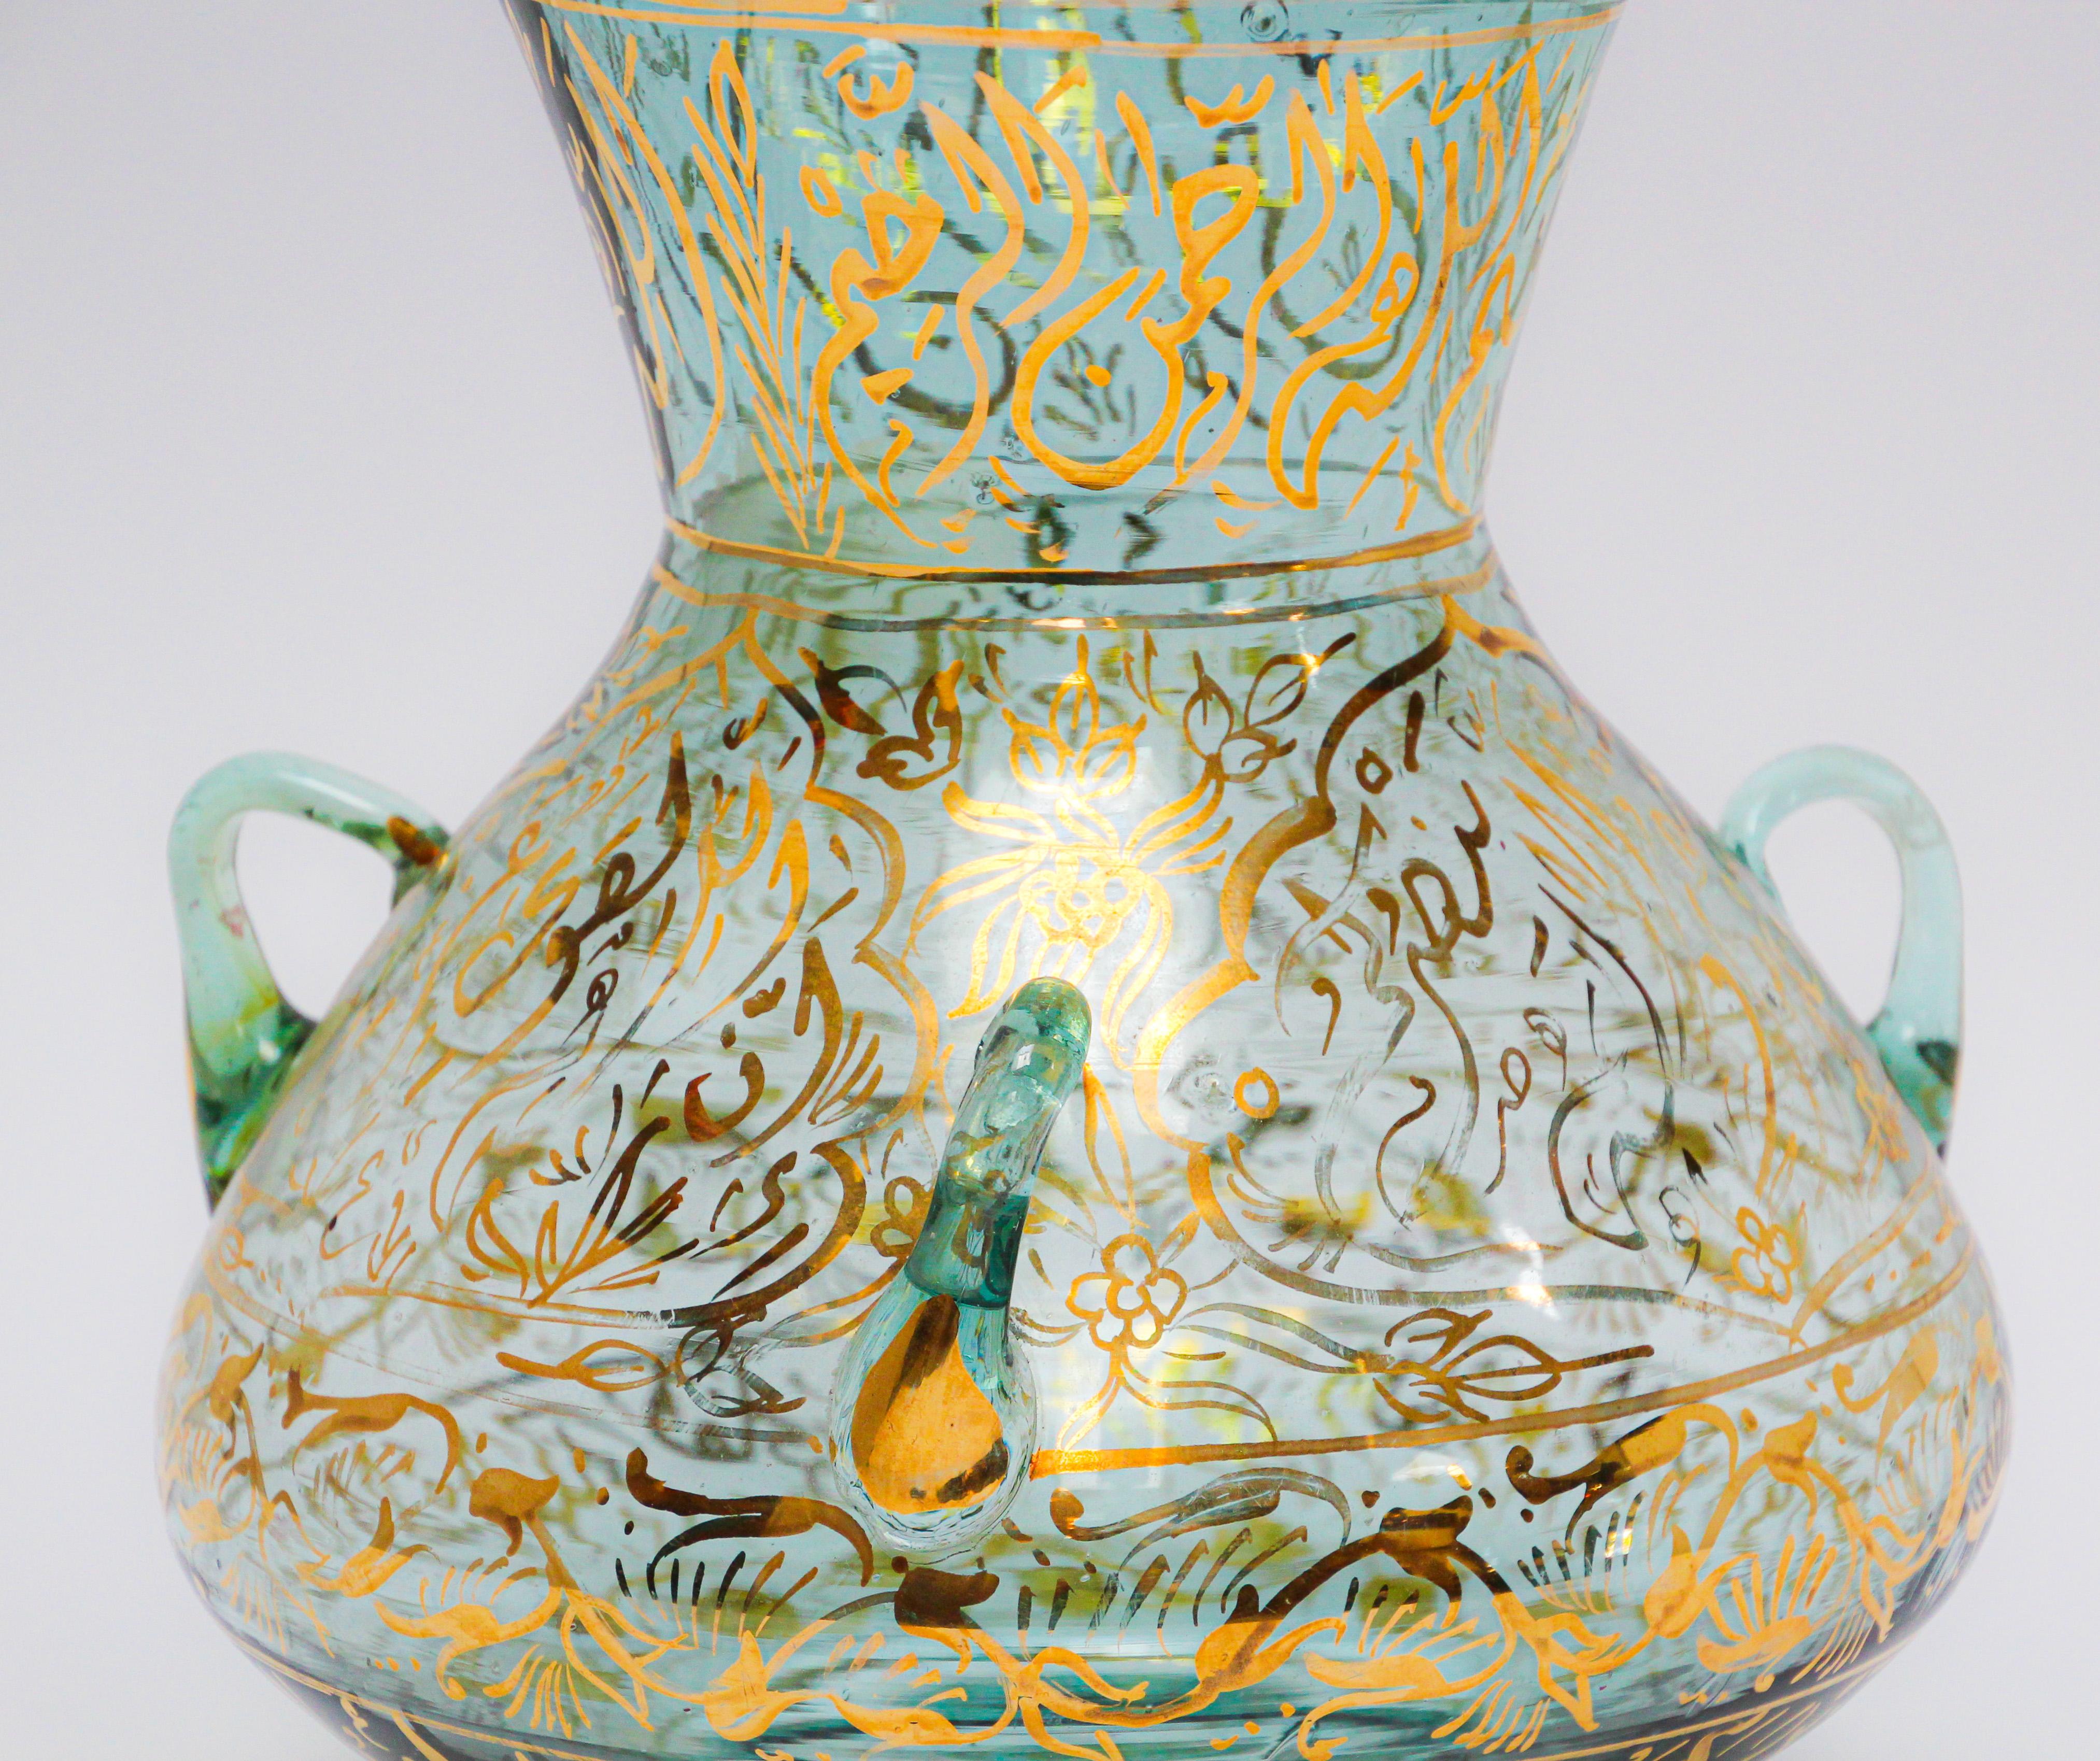 20th Century Handblown Mosque Glass Lamp in Mameluke Style Gilded with Arabic Calligraphy